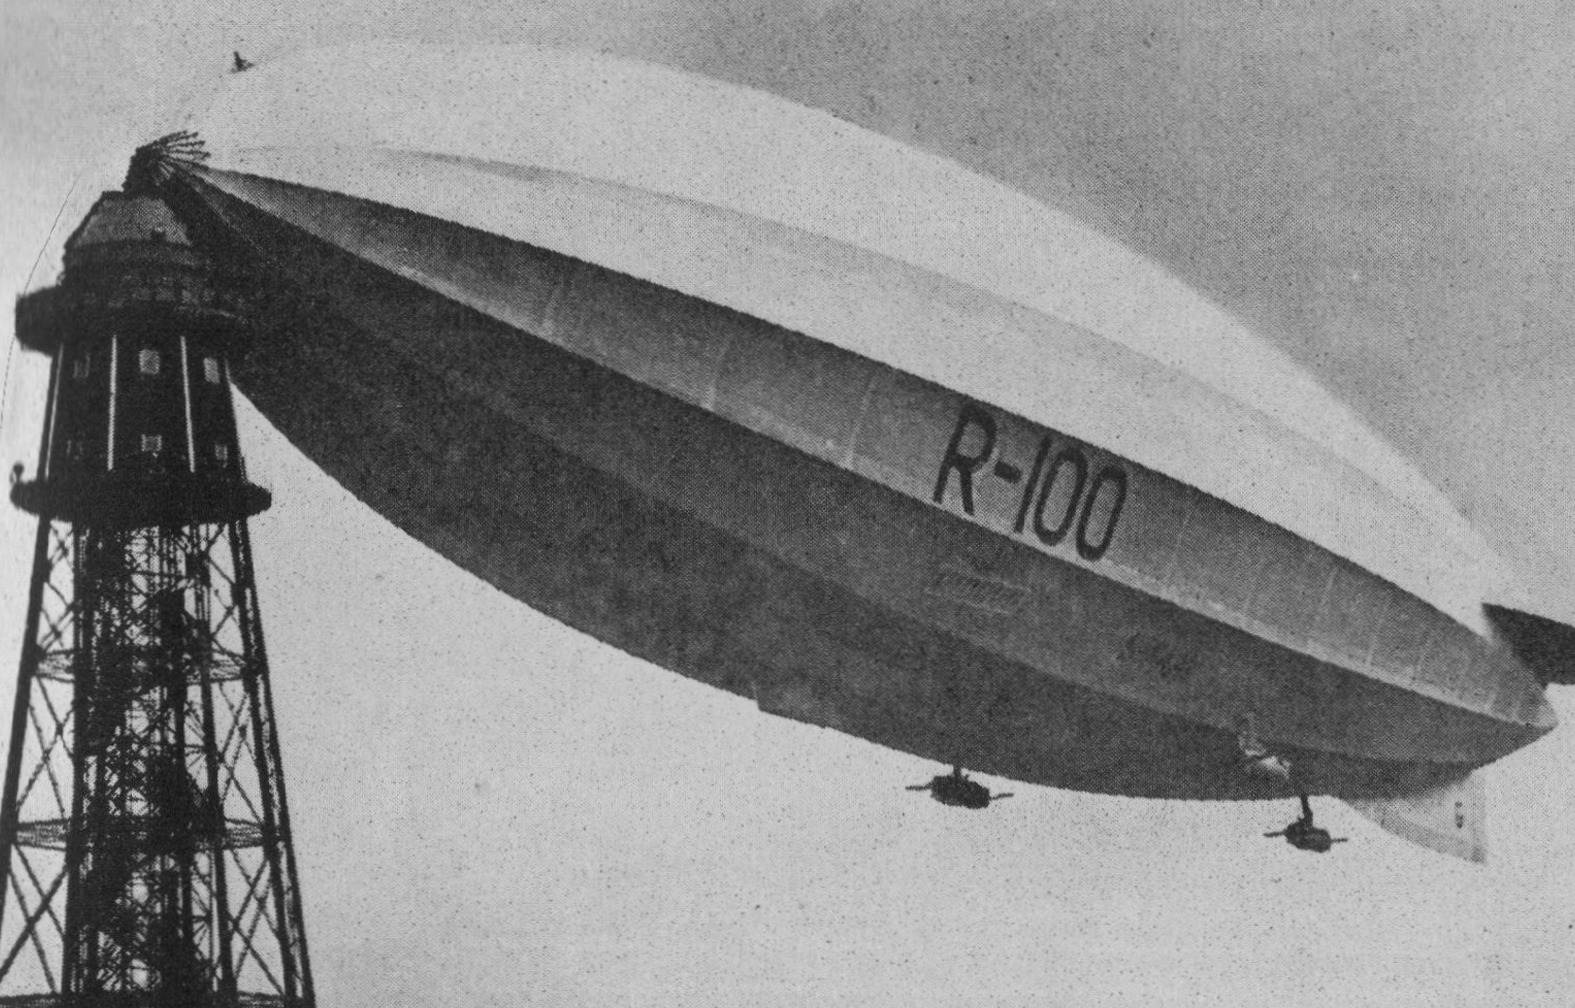 Black and white picture of a Zeppelin airship